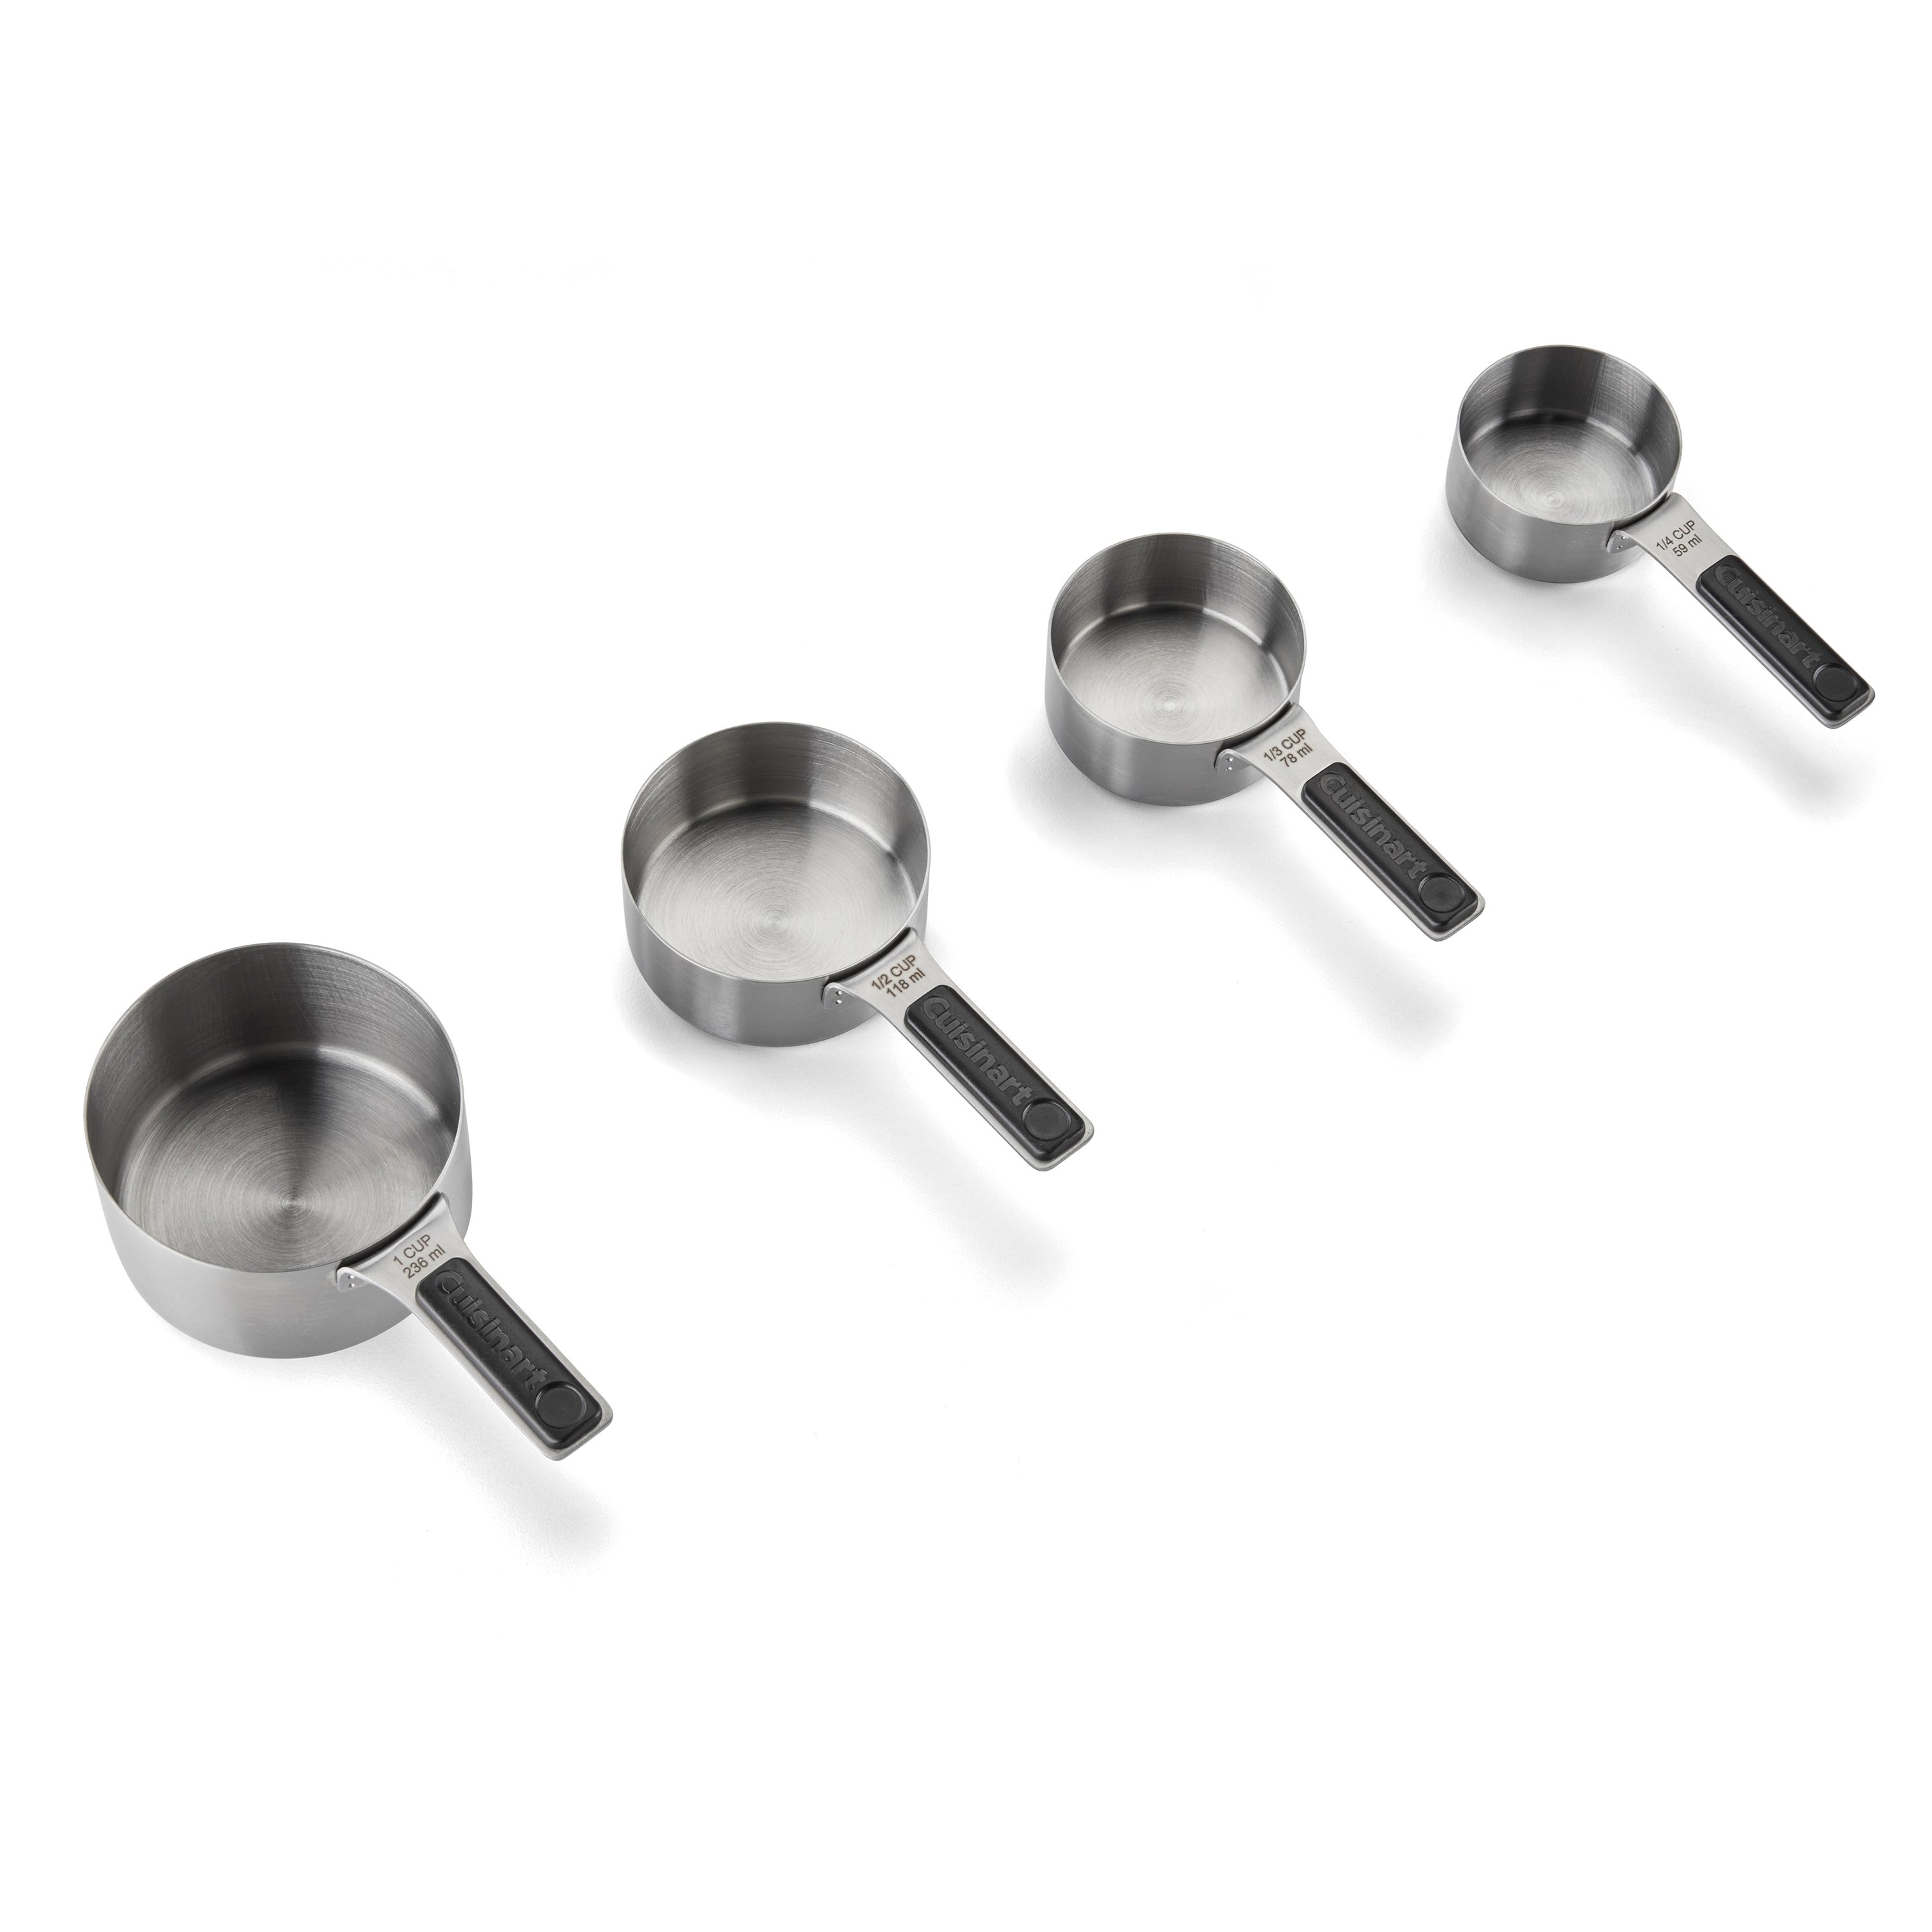 All-Clad Stainless Steel Measuring Cups 4 pc Set. NEW!